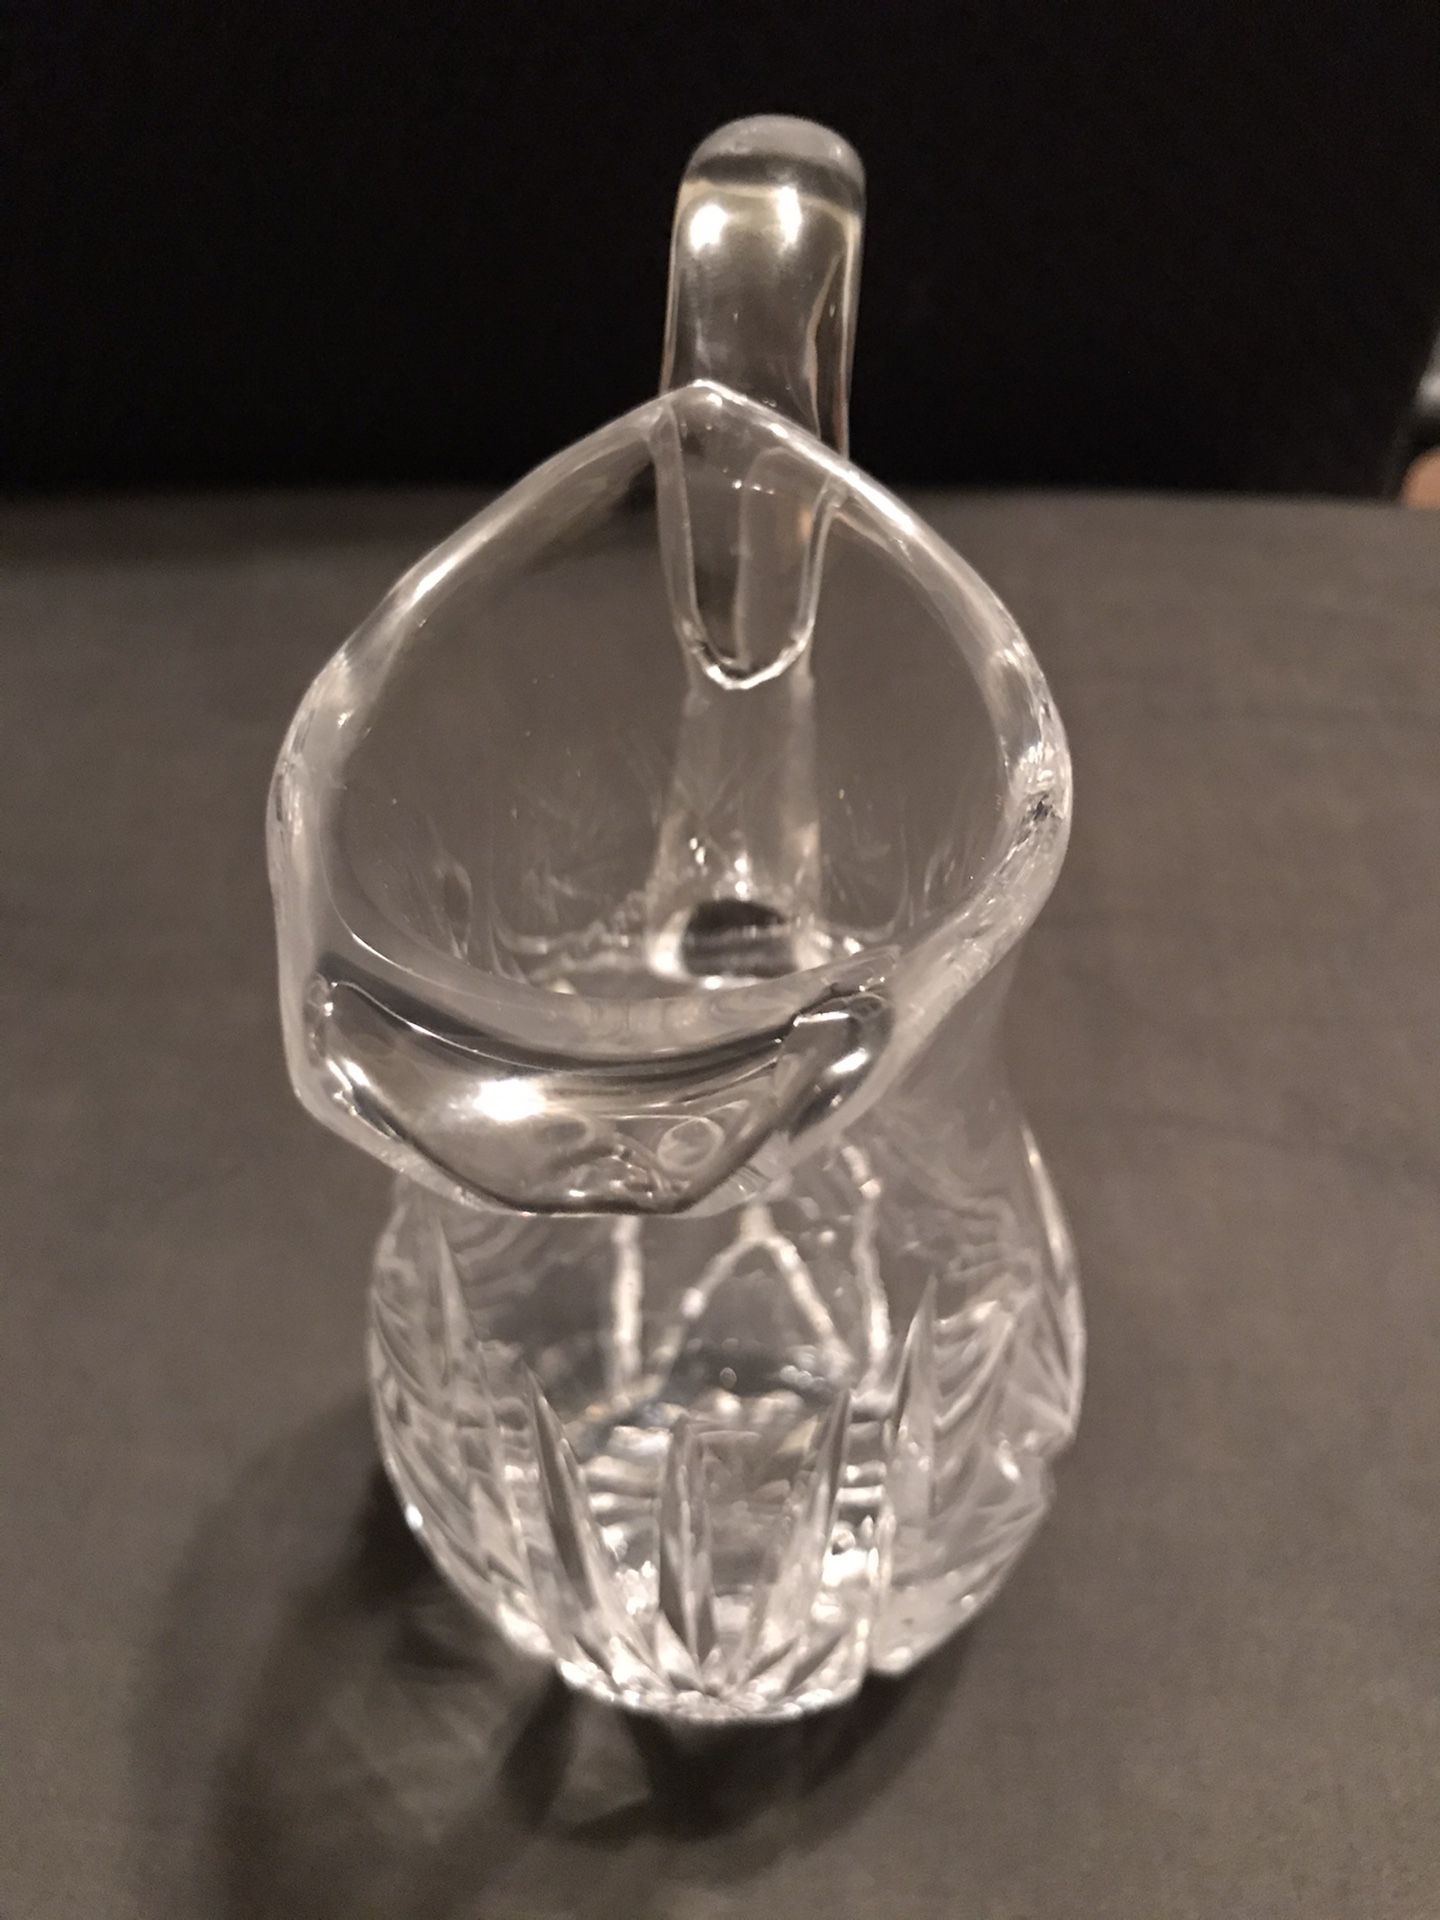 Vintage 8 Point Star Crystal Cut Glass Pitcher 8 1/8”Tall in Excellent Condition